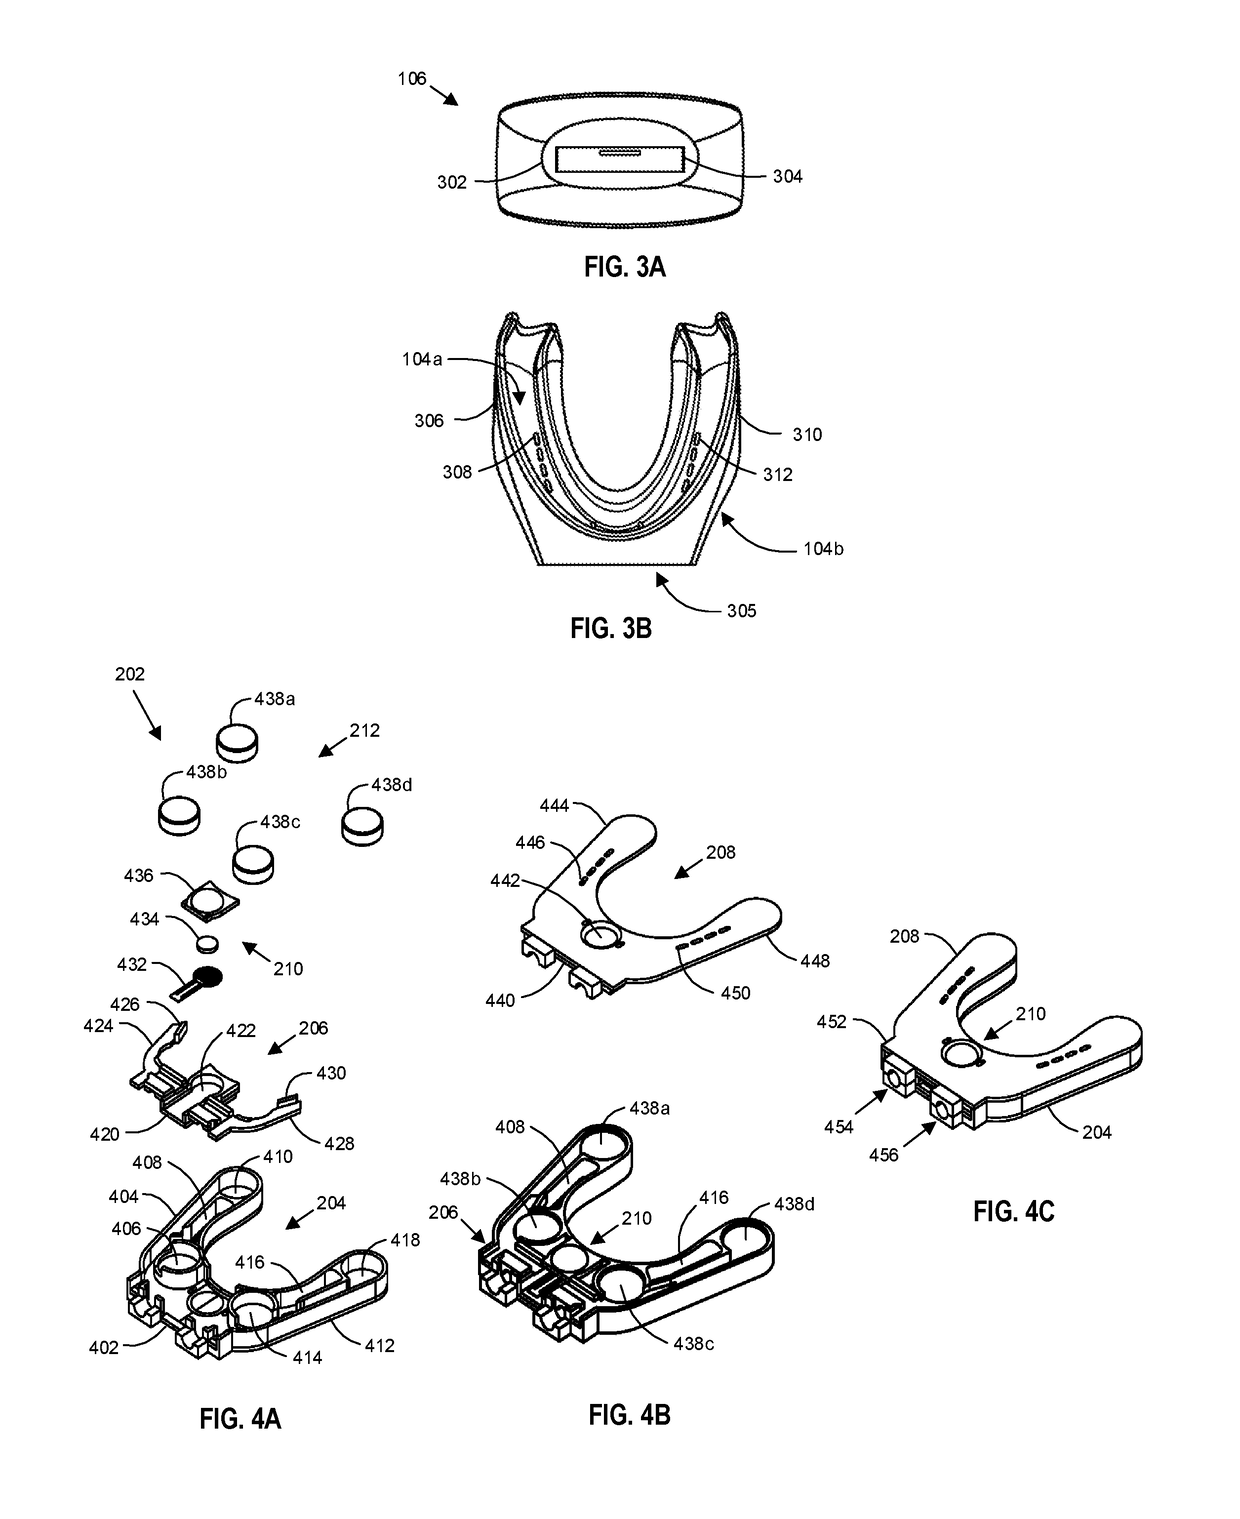 Bristle-Less Teeth Cleaning Device with Automatic Gel Dispensing for Combined Mechanical and Chemical Activation